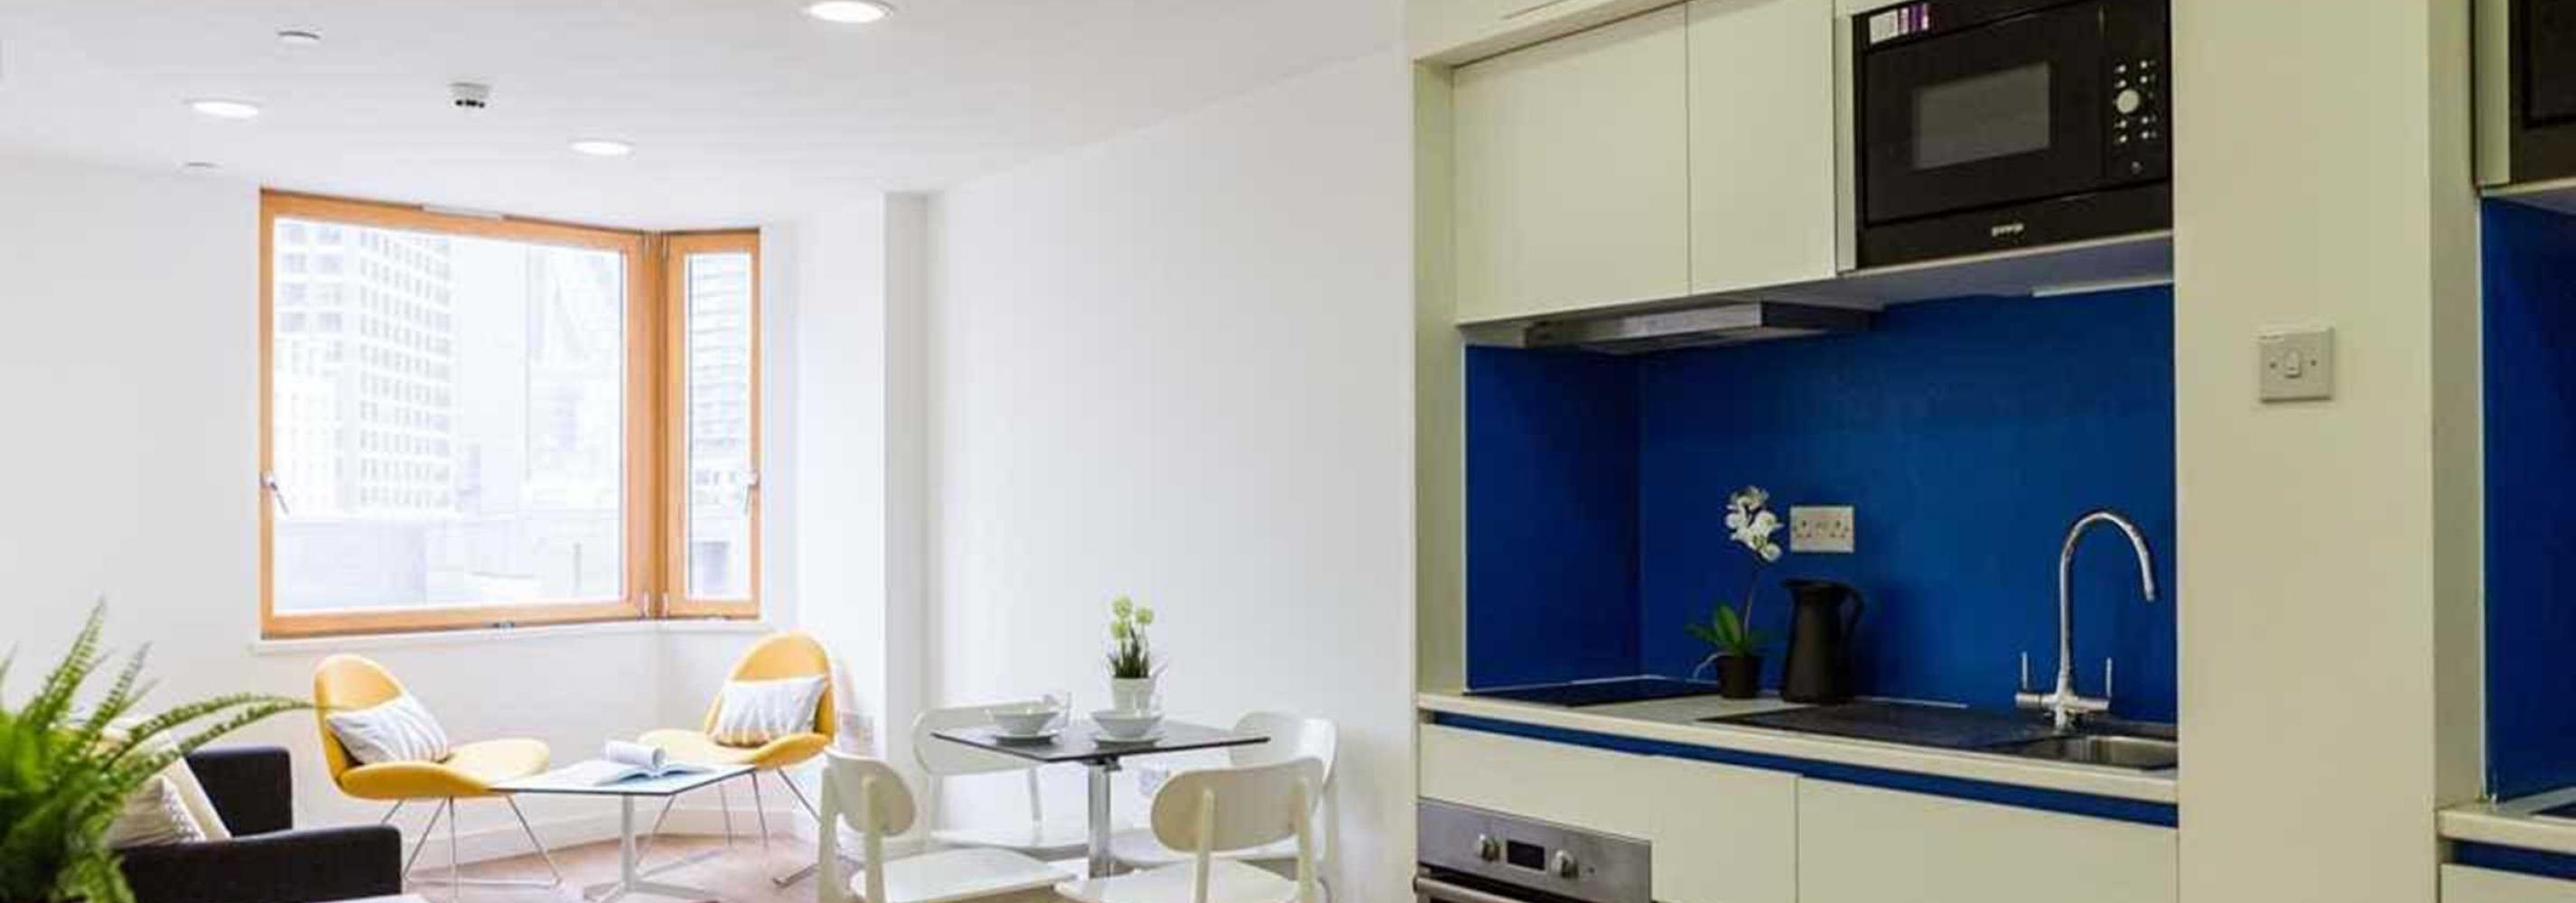 Kitchen area with cupboards, work surface, oven and dining area with tables and chairs